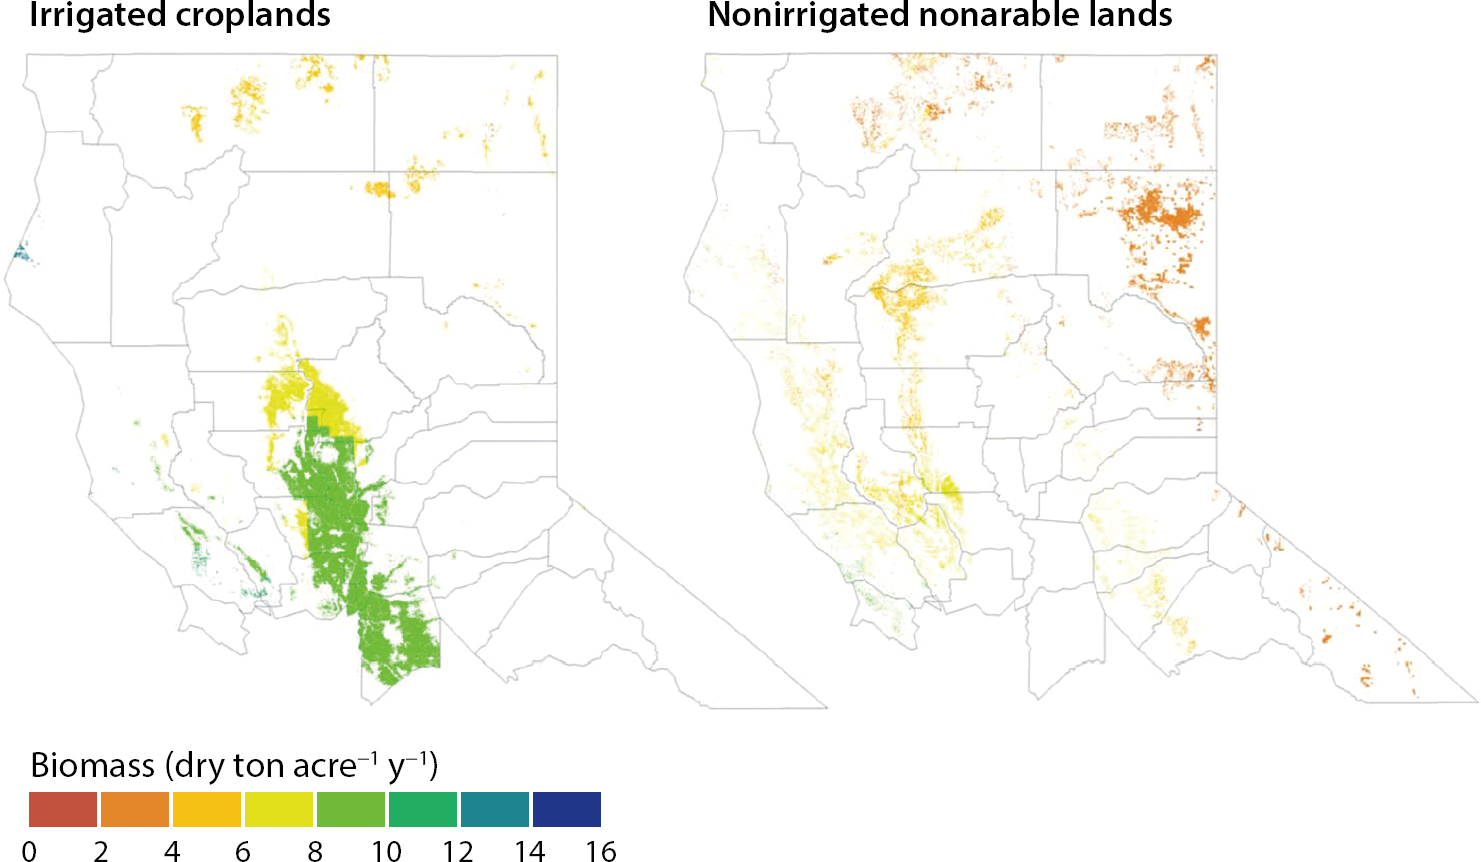 Spatial estimates of poplar biomass yields (dry tons per acre per year) from suitable irrigated croplands and nonarable lands (nonirrigated pasture and grasslands).